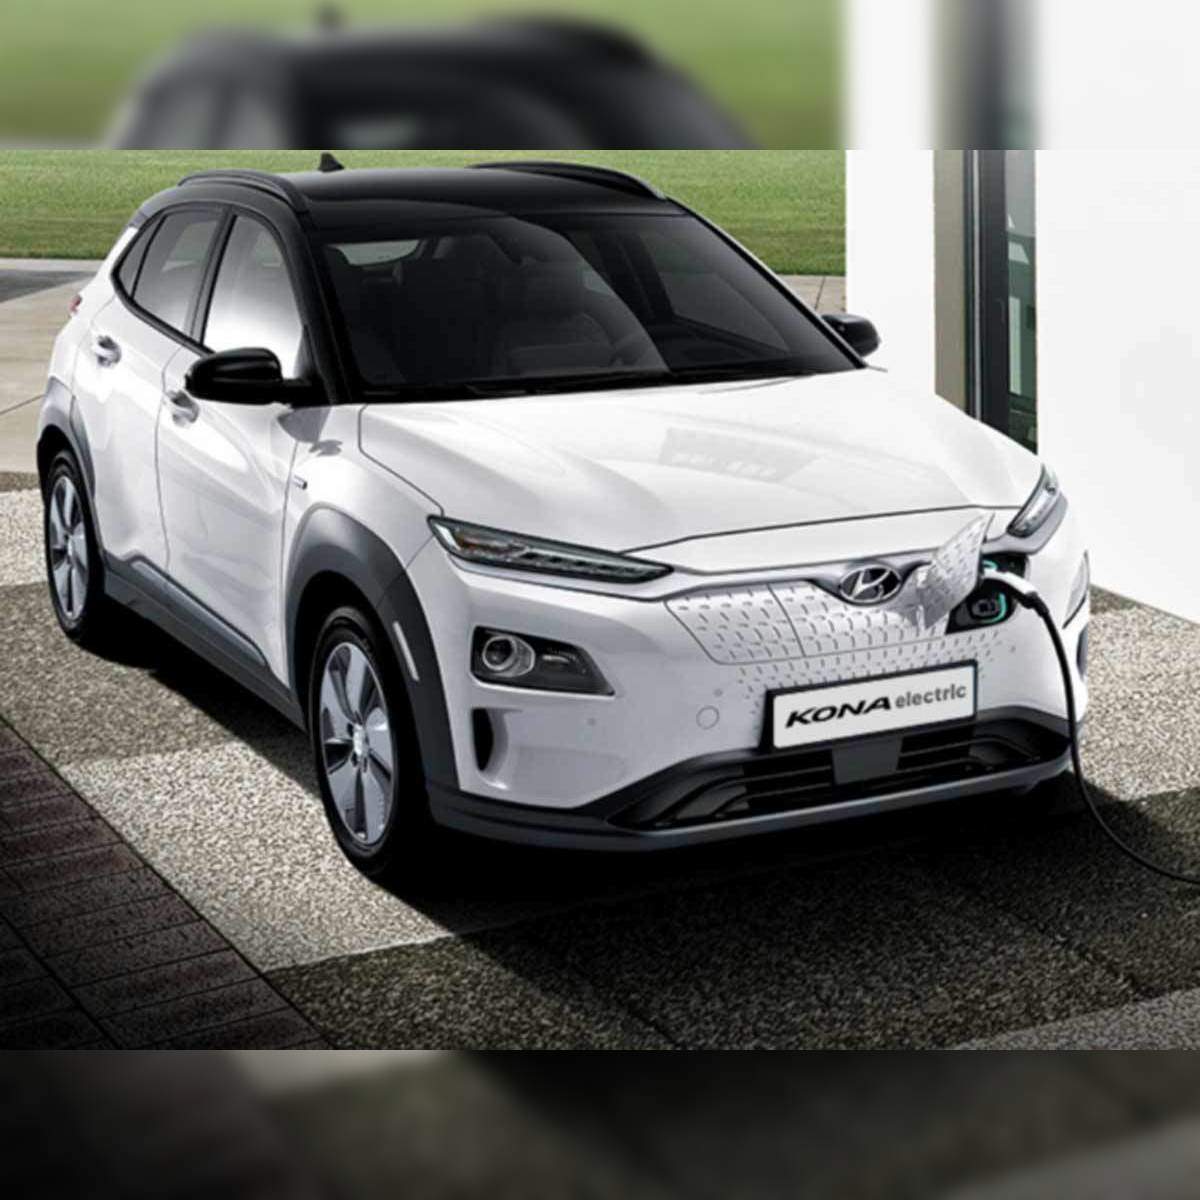 Hyundai Kona Electric An Excellent Car Whose Reputation Has Suffered at the  Hands of…Hyundai, by Tomwalker, ILLUMINATION'S MIRROR